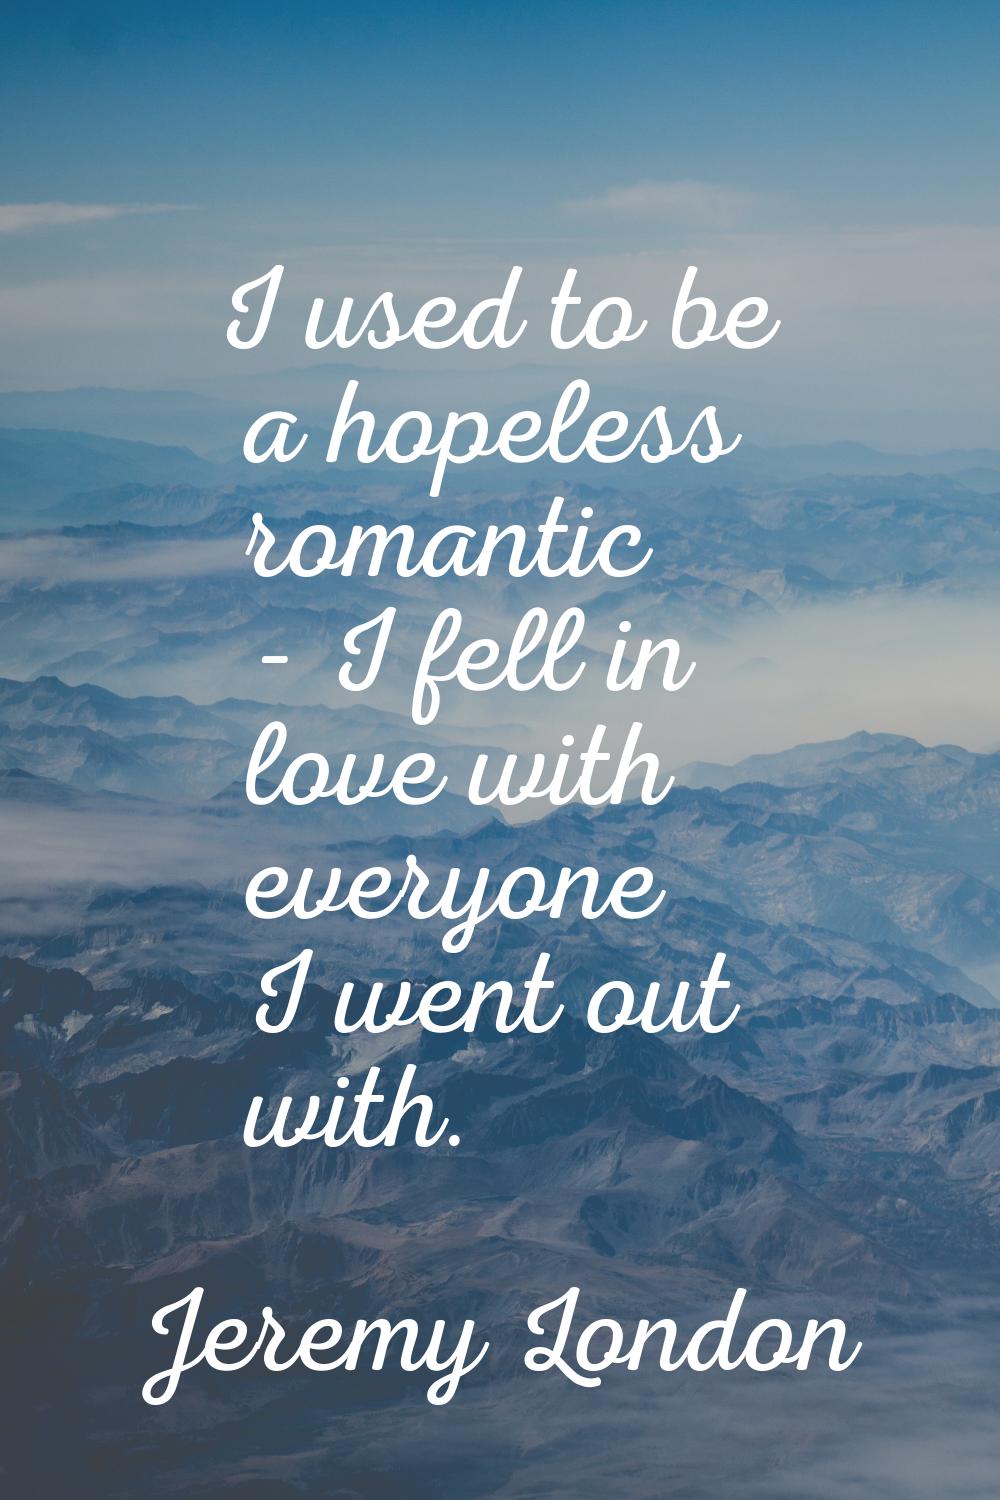 I used to be a hopeless romantic - I fell in love with everyone I went out with.